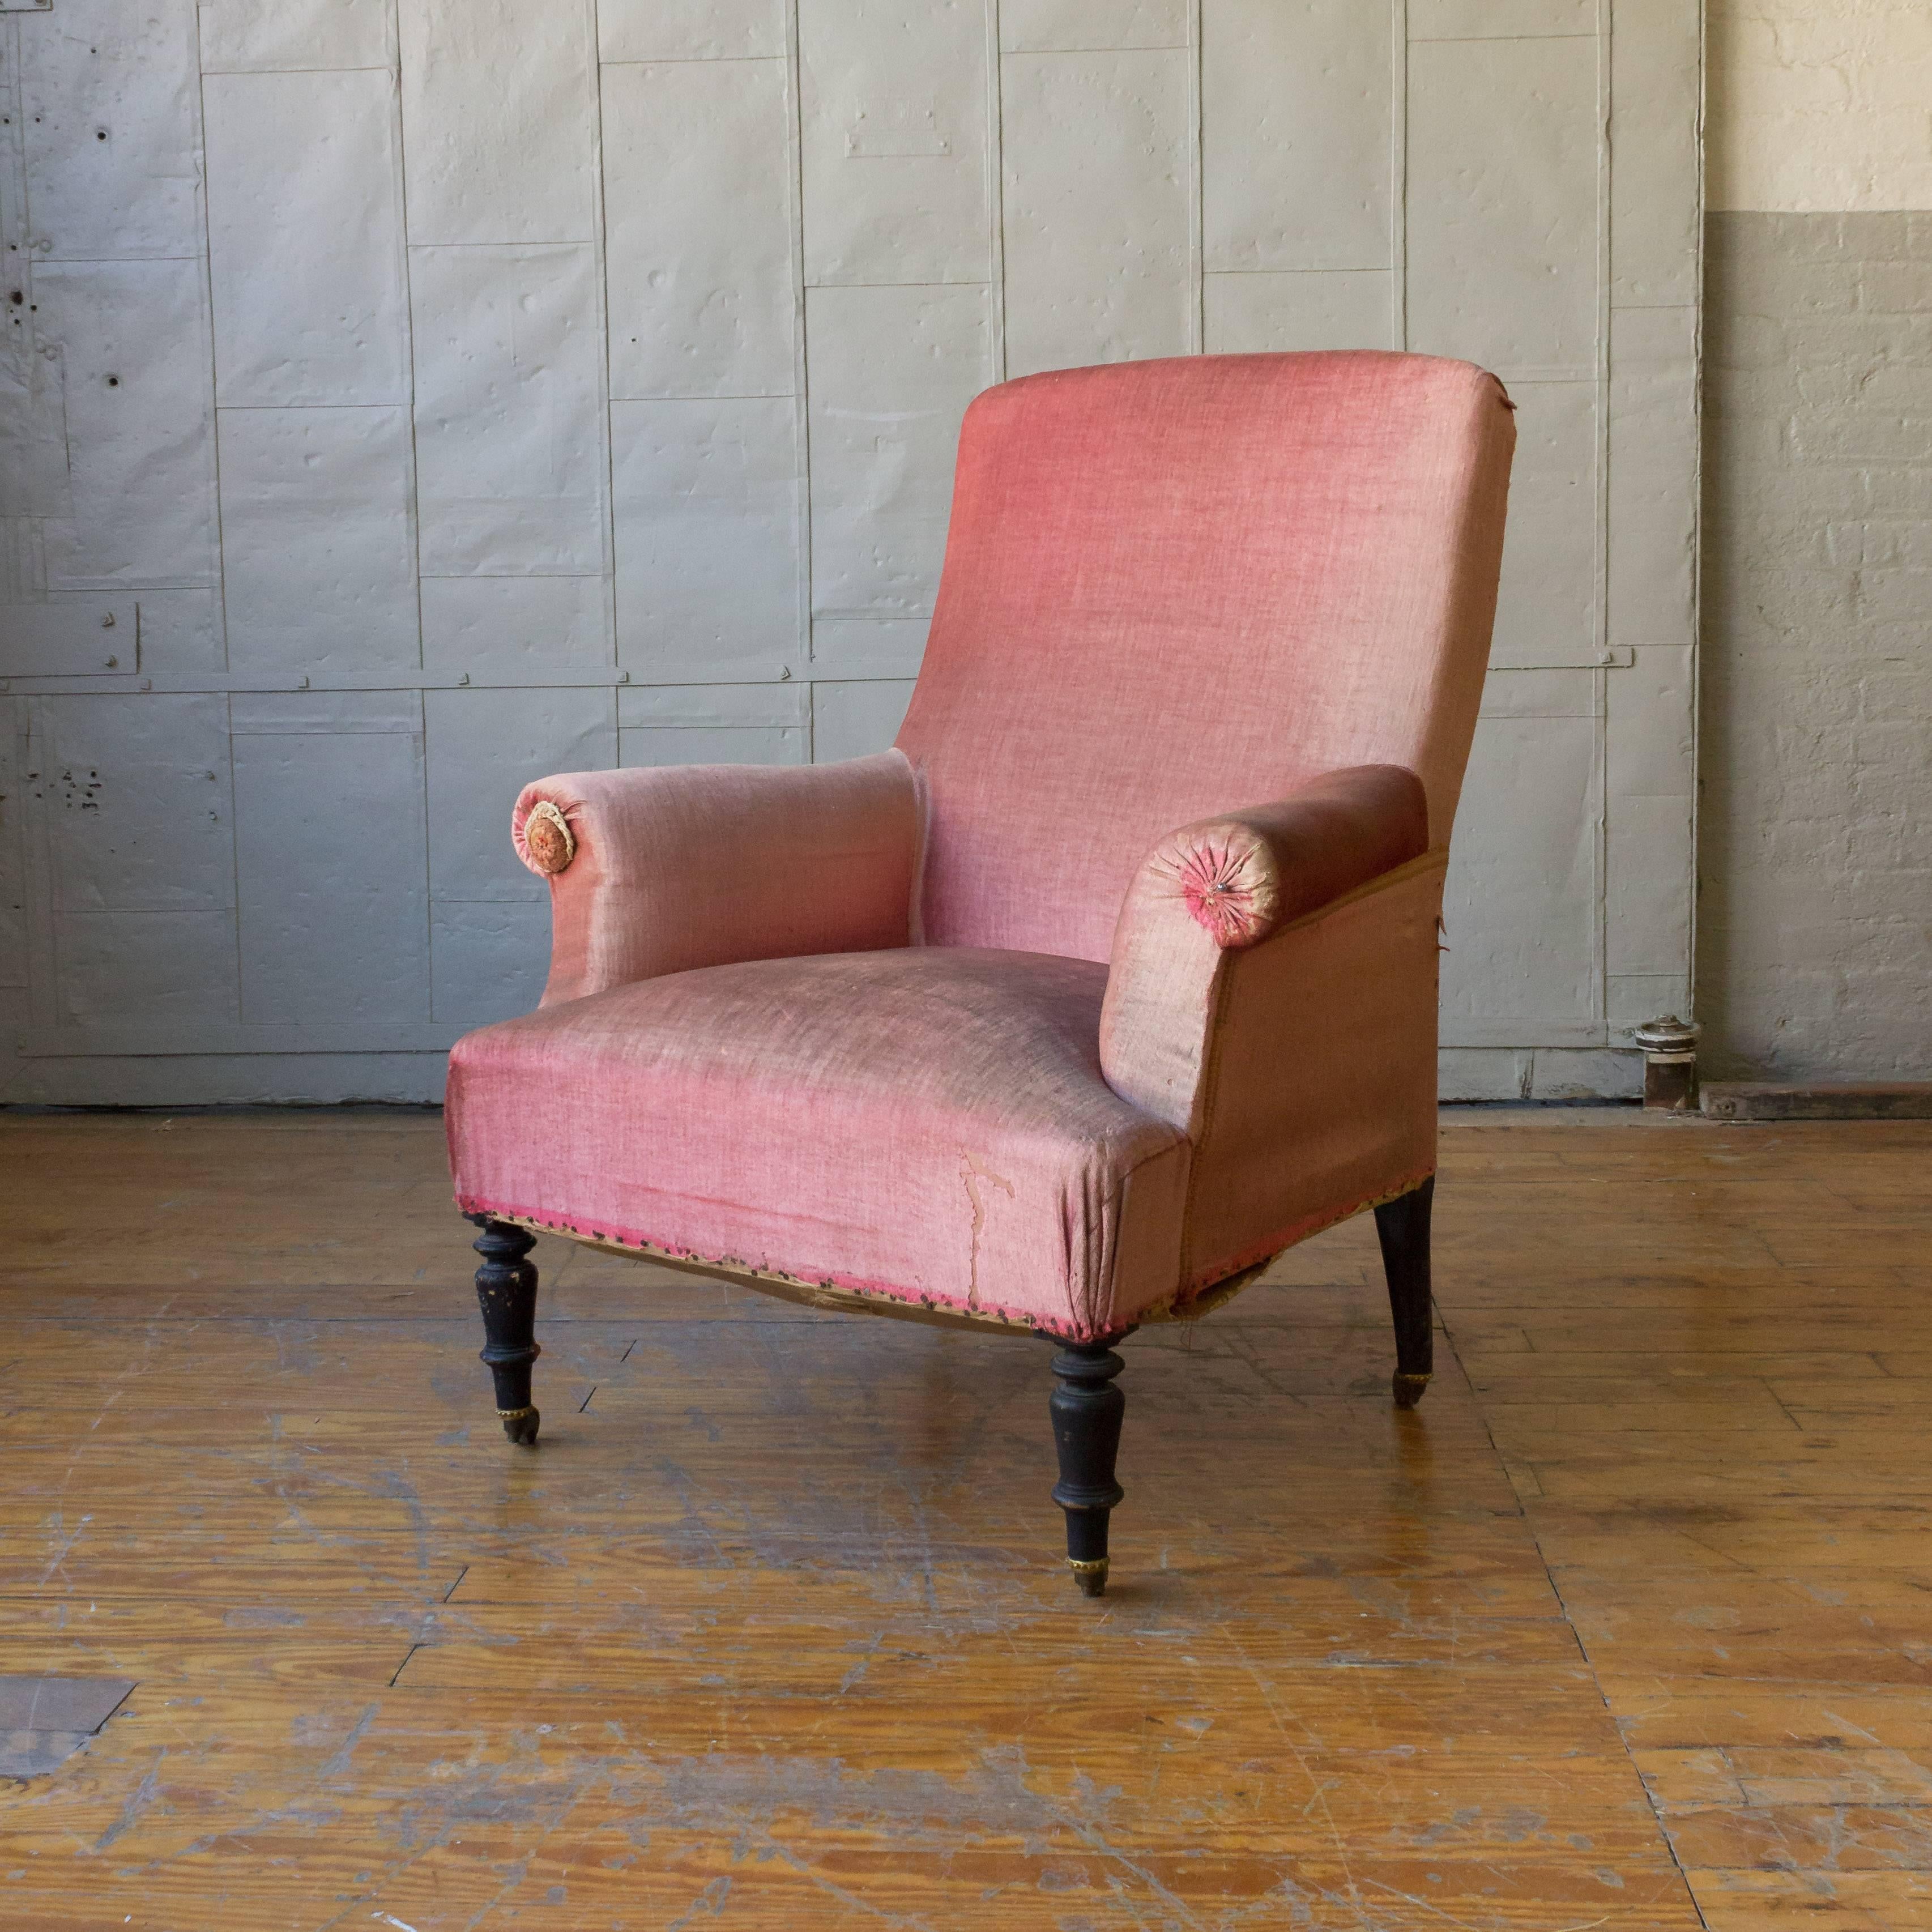 Napoleon III armchair with ottoman, upholstered in coral colored velvet. The chair and ottoman are sold as, upholstery services are available, price on request.
